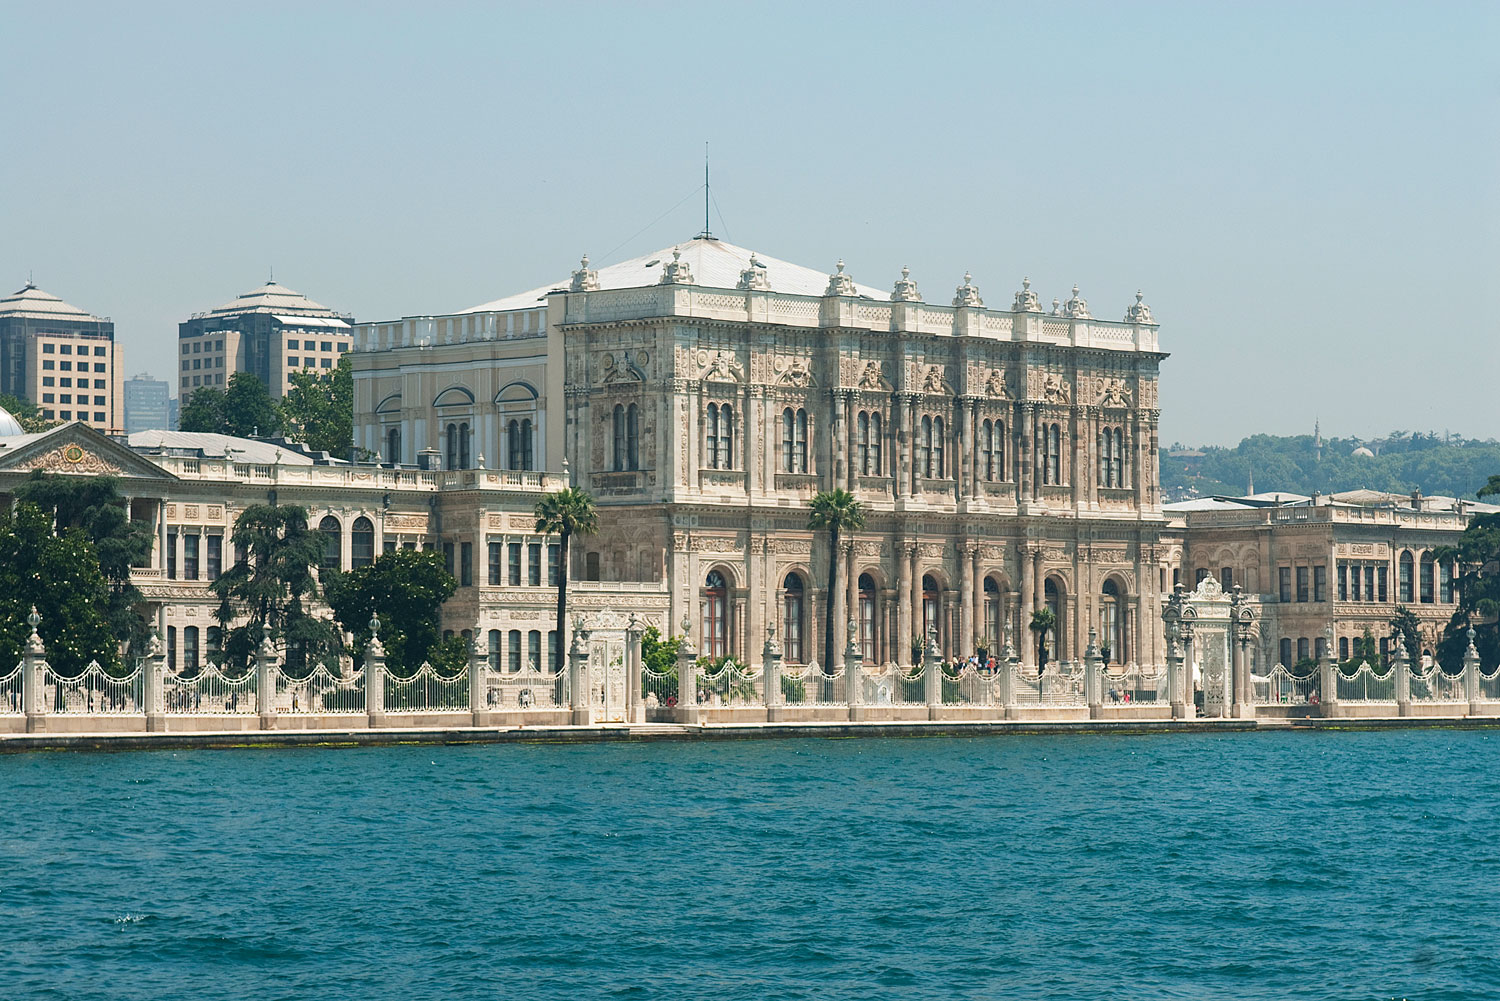 https://www.yizuo-media.com/albums/albums/userpics/10003/Dolmabahce_Palace.jpg